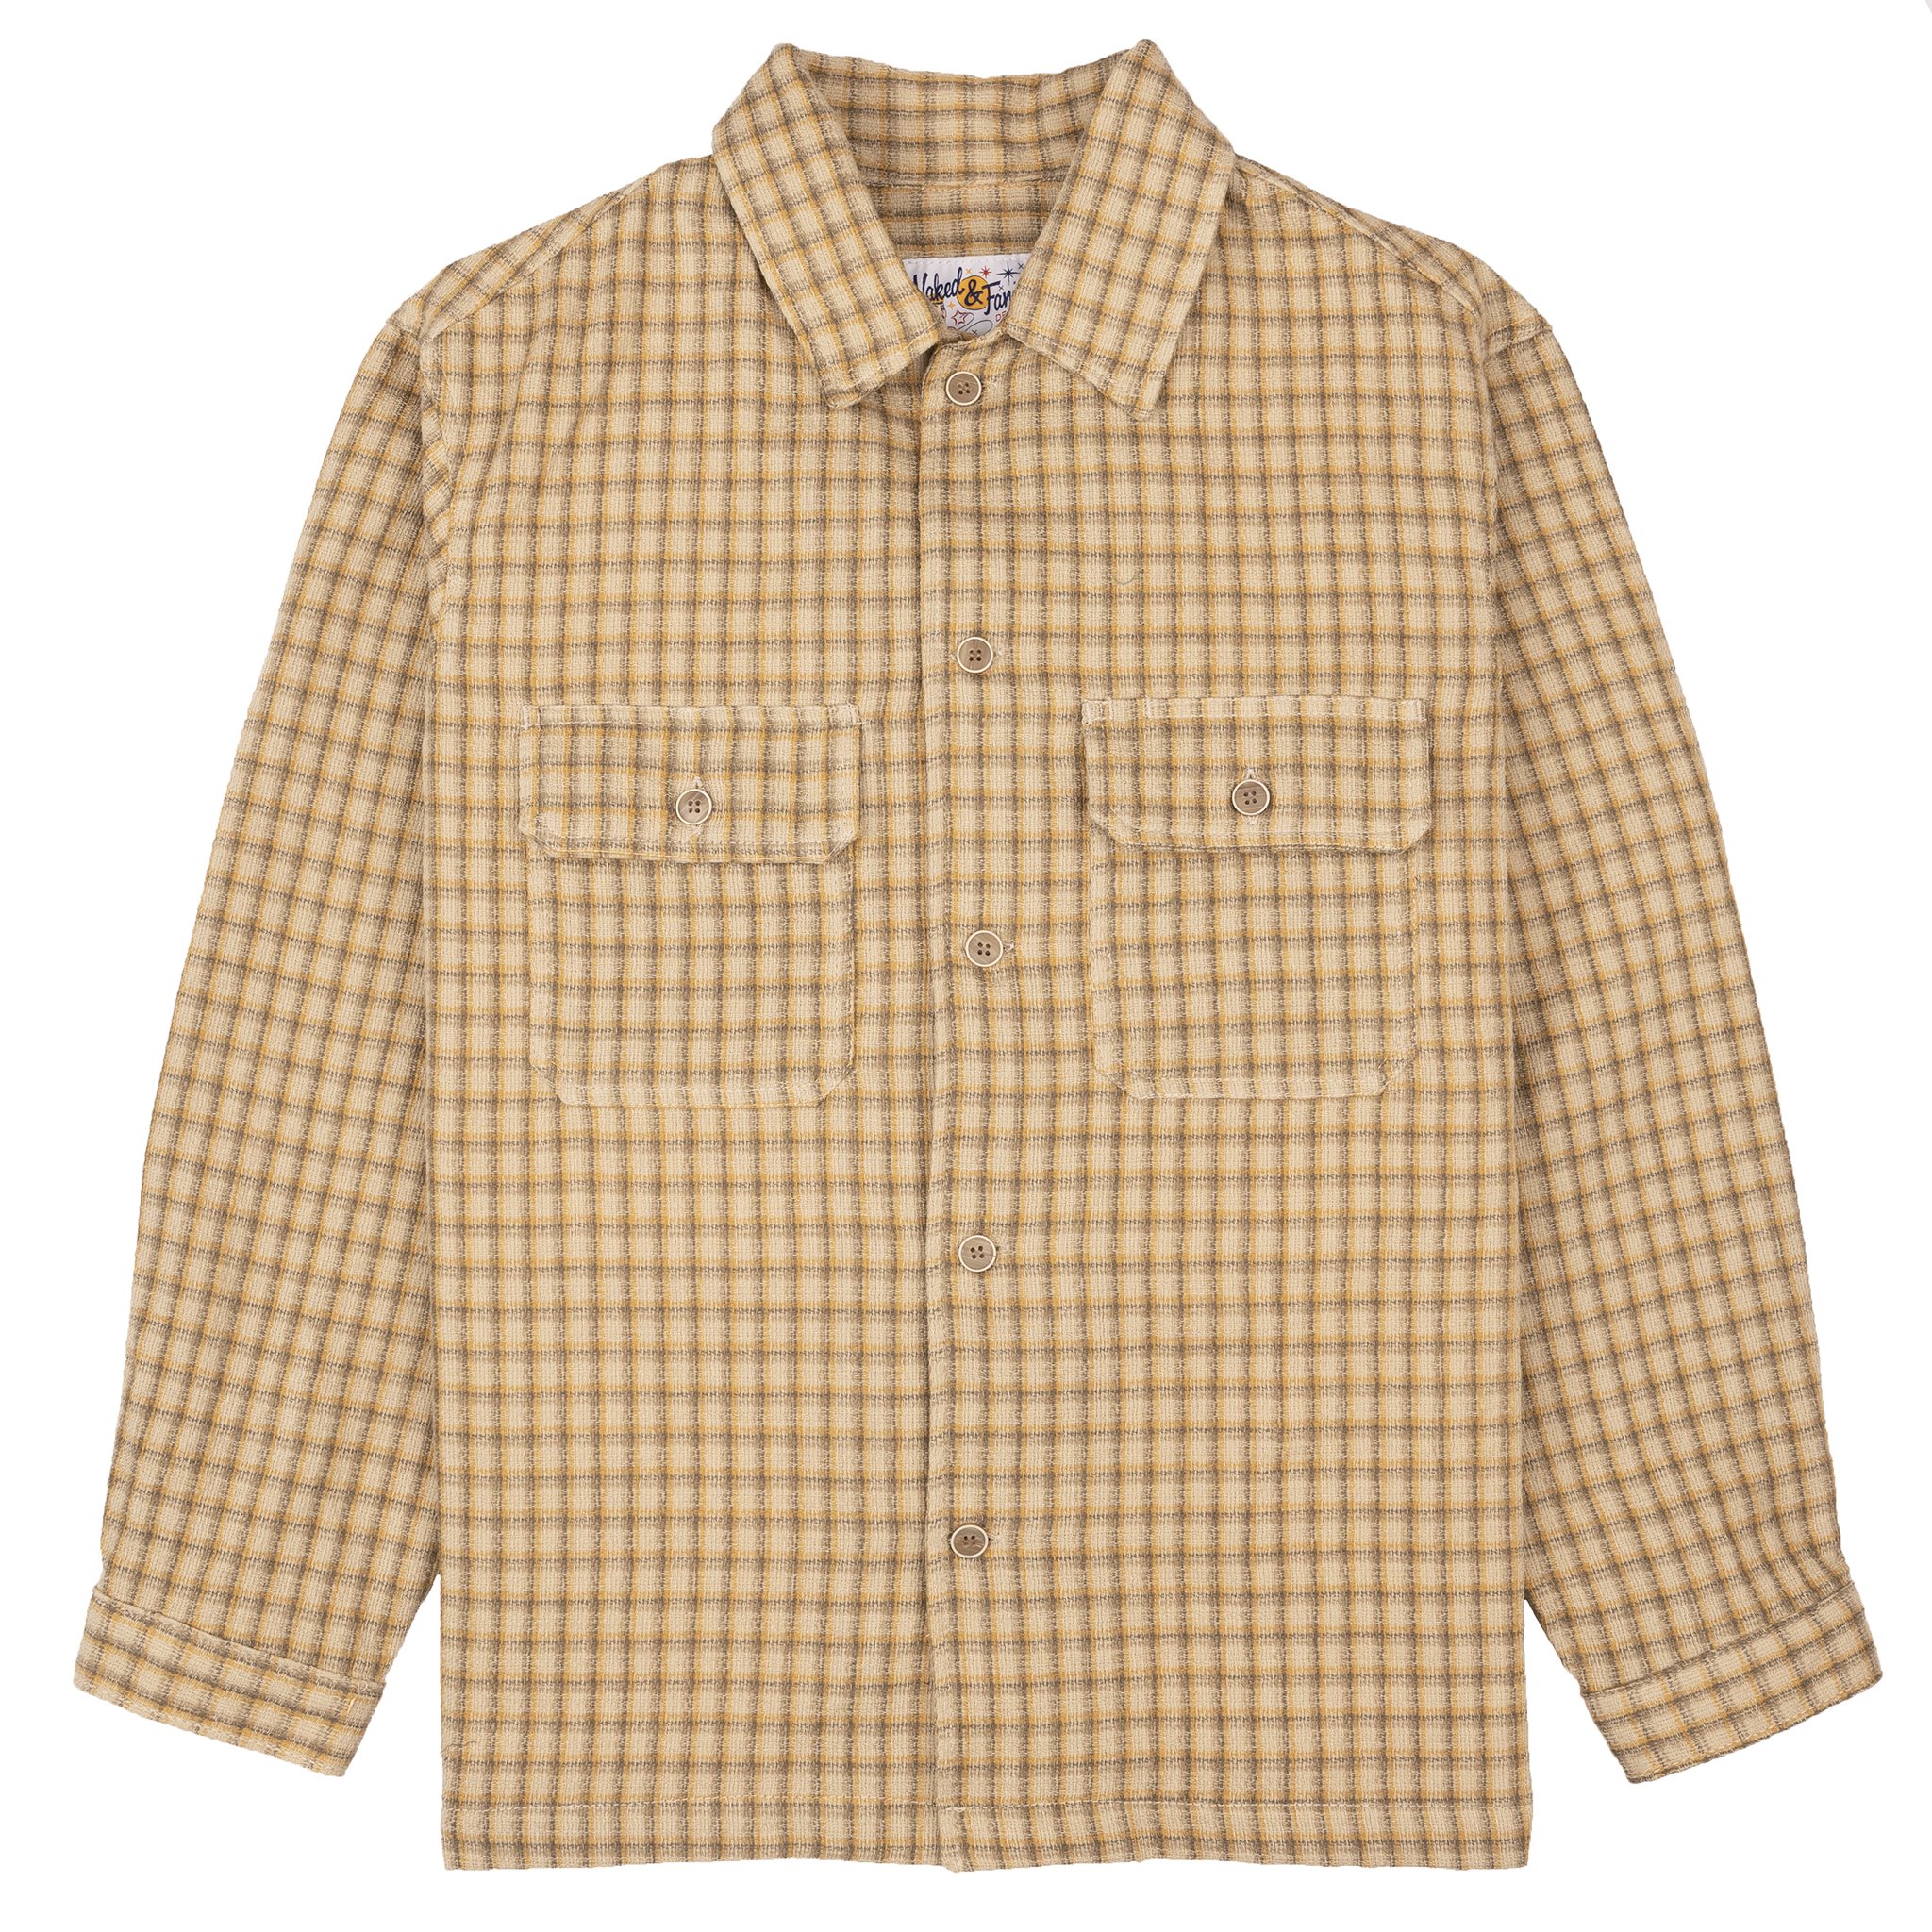  Over Shirt - Yarn Dyed Double Cloth - Sand 